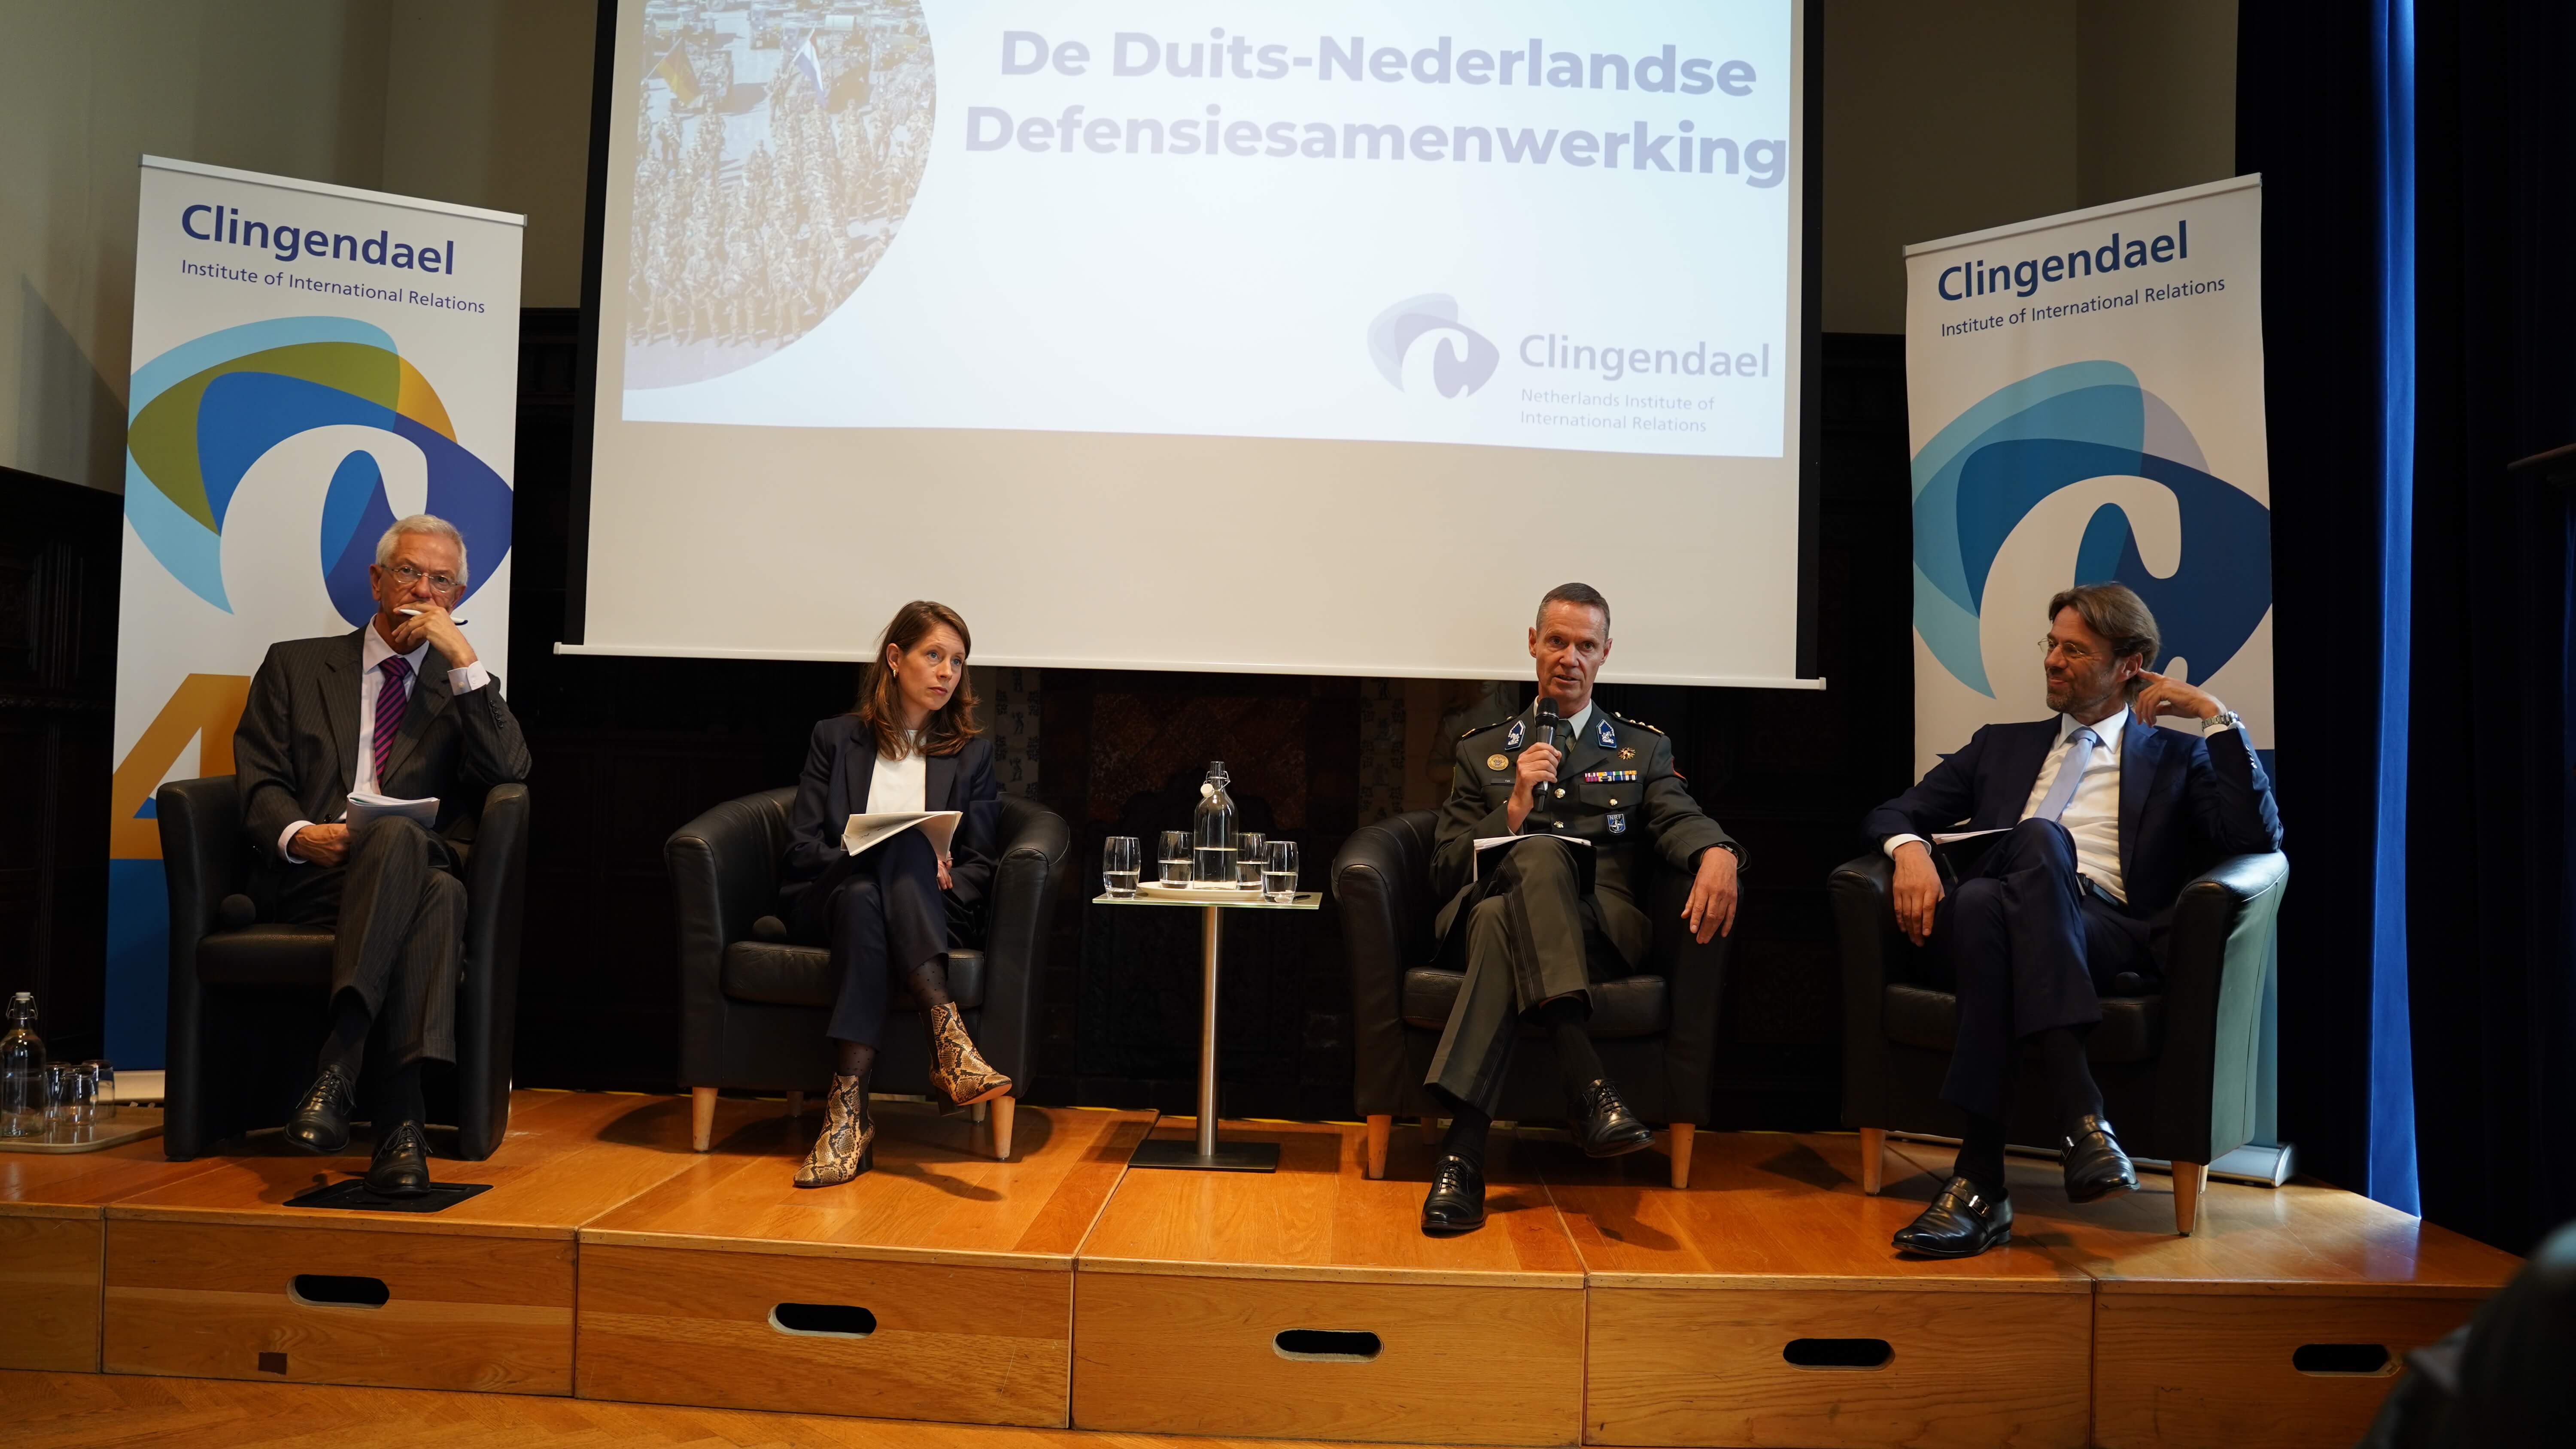 Dick Zandee (Head of Security Unit at the Clingendael Institute), Anna van Zoest (Director Atlantic Commission), Lieutenant General Nico Tak (Commander 1st German-Dutch Army Corps), Lars Walrave (Director International Affairs, Ministry of Defence)